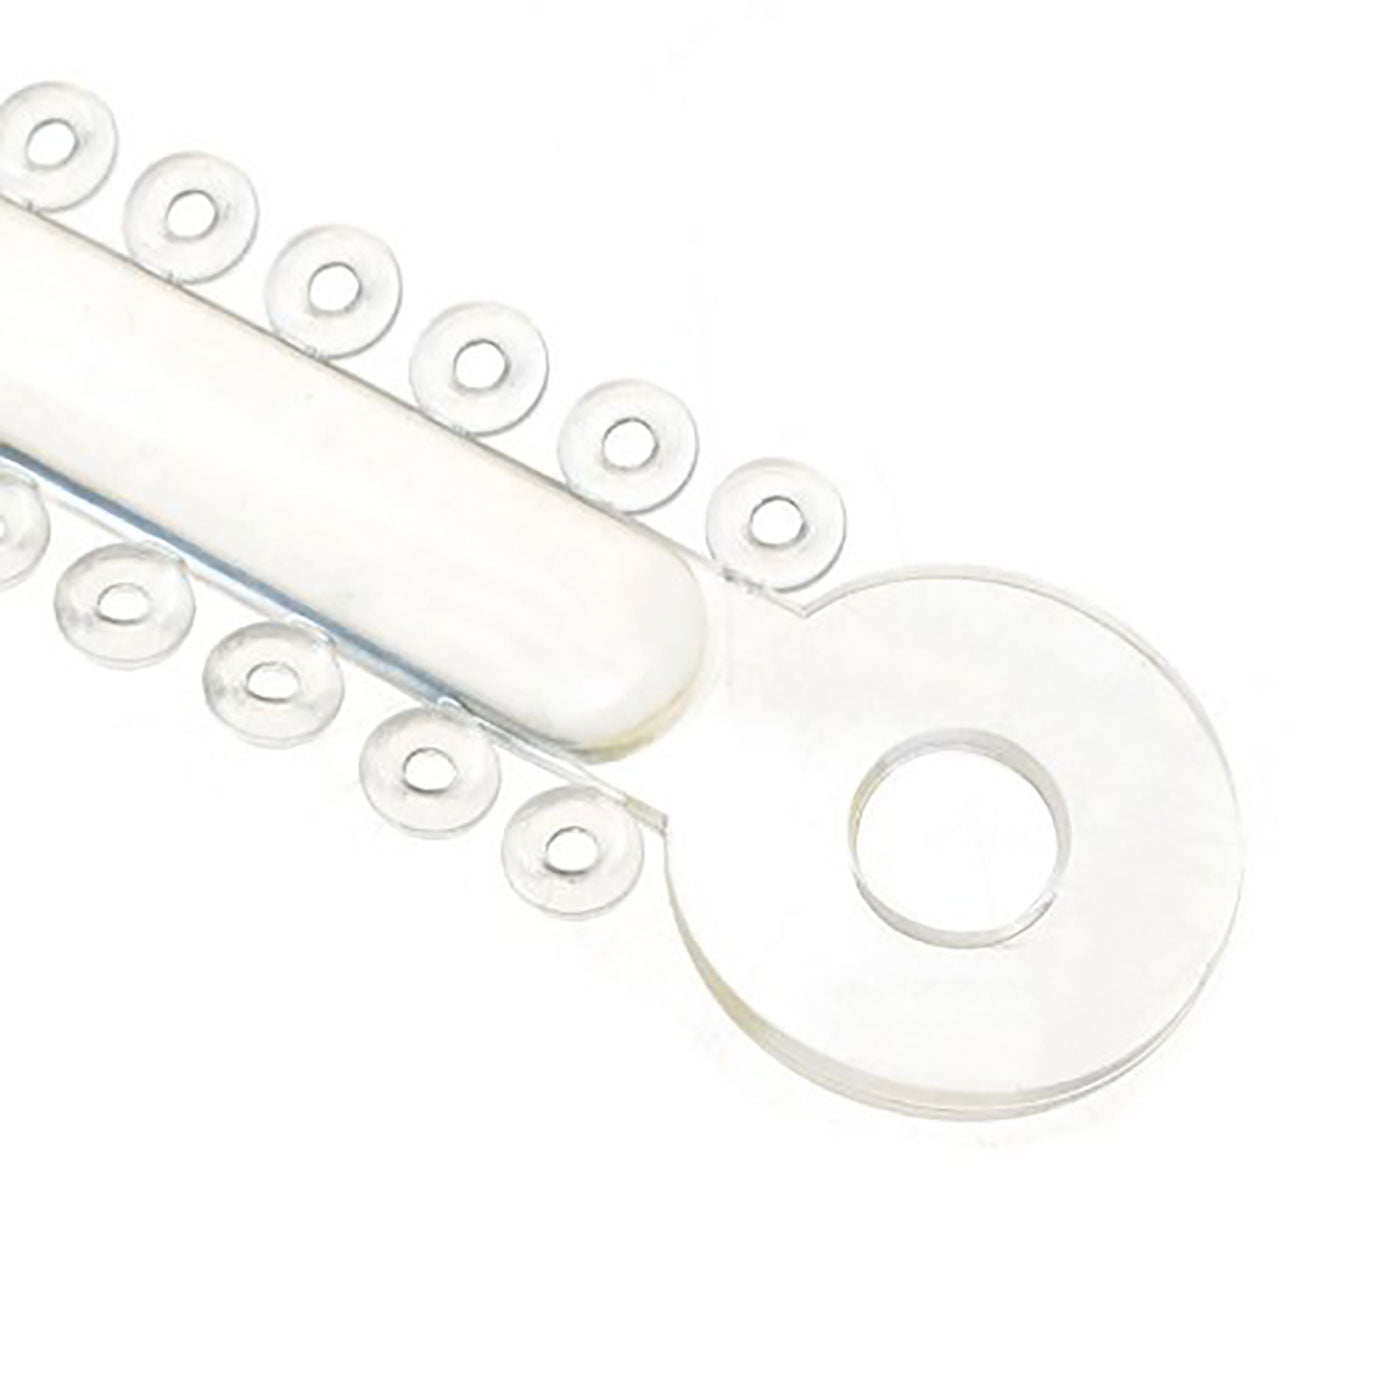 AZDENT Orthodontic Ligature Ties Clear Color 1014 pcs/pack - azdentall.com